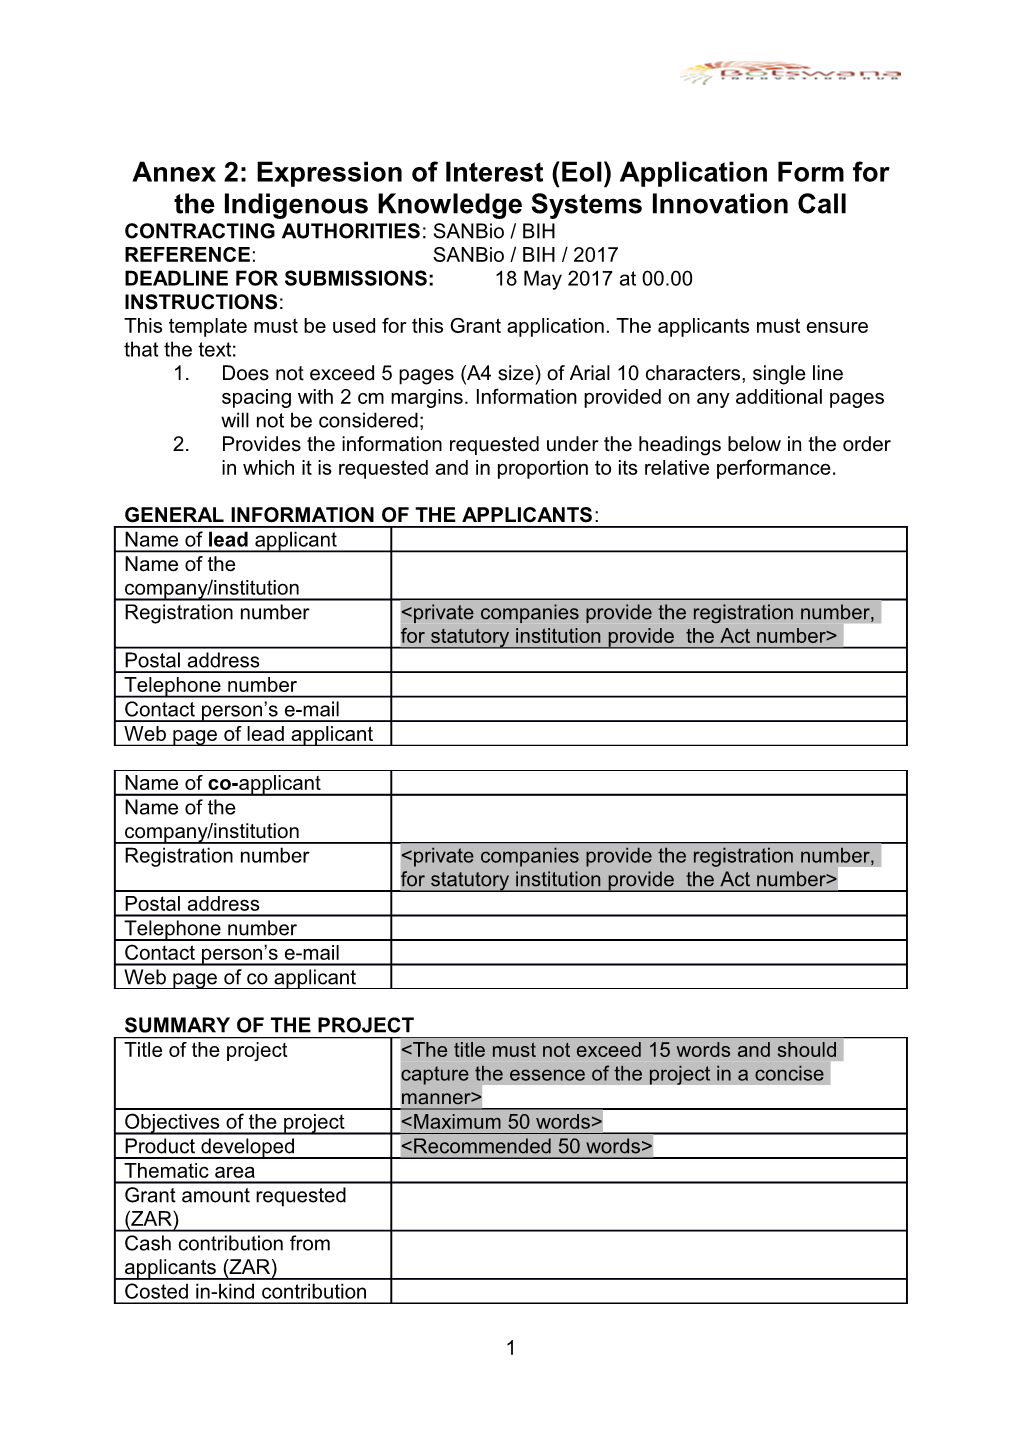 Annex 2: Expression of Interest (Eoi) Application Form for the Indigenous Knowledge